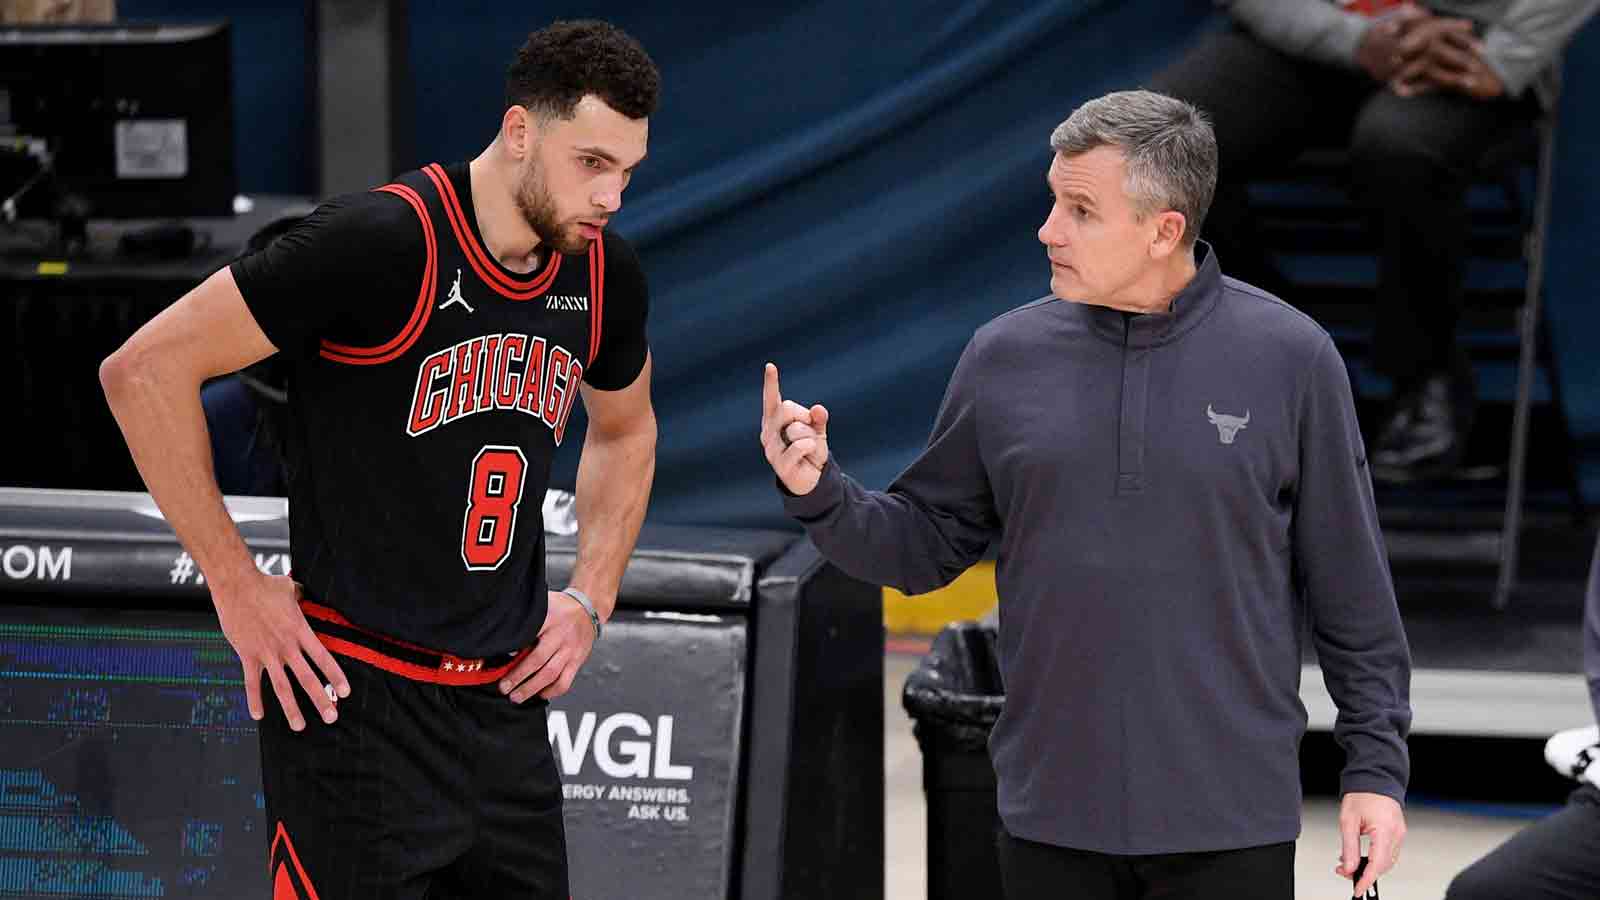 Why the relationship between Billy Donovan and Zach LaVine matters to the Bulls in the long run